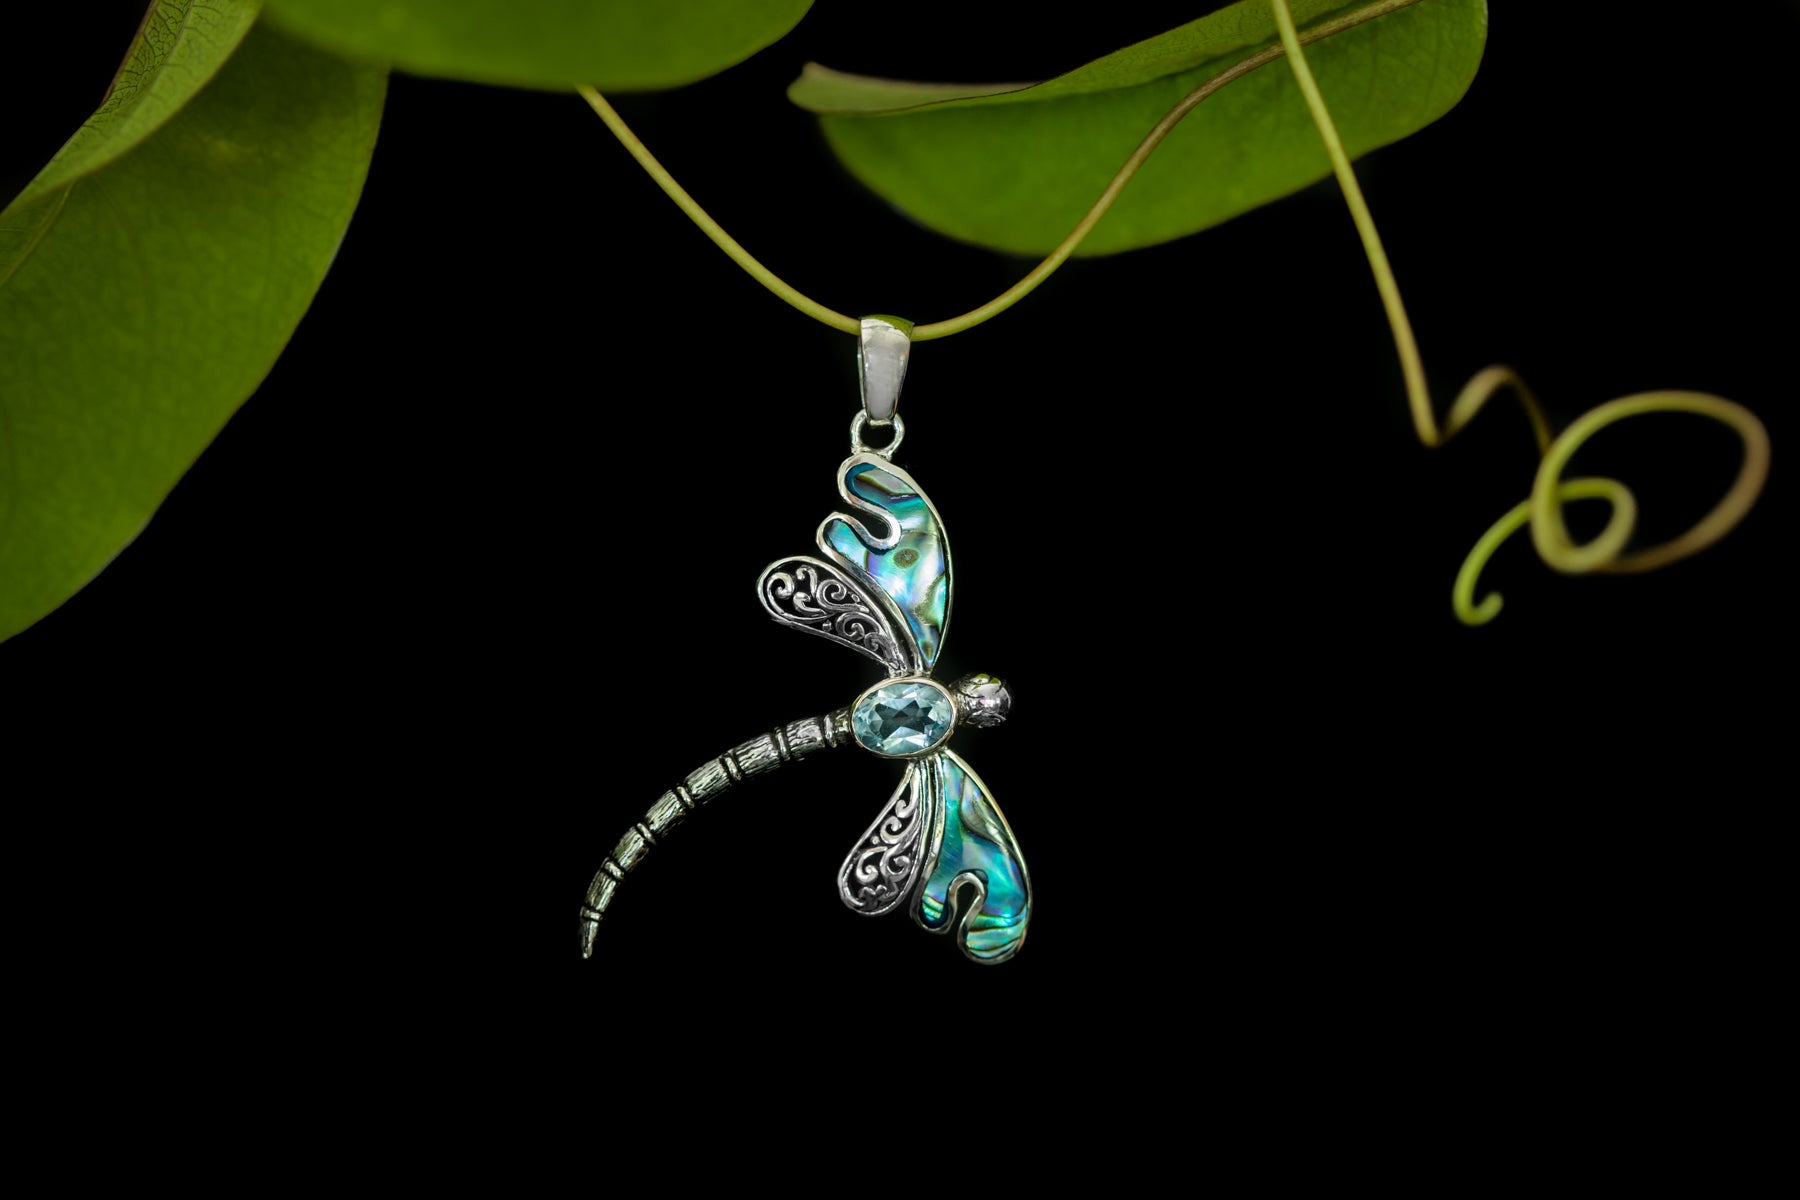 The Dragonfly Pendant